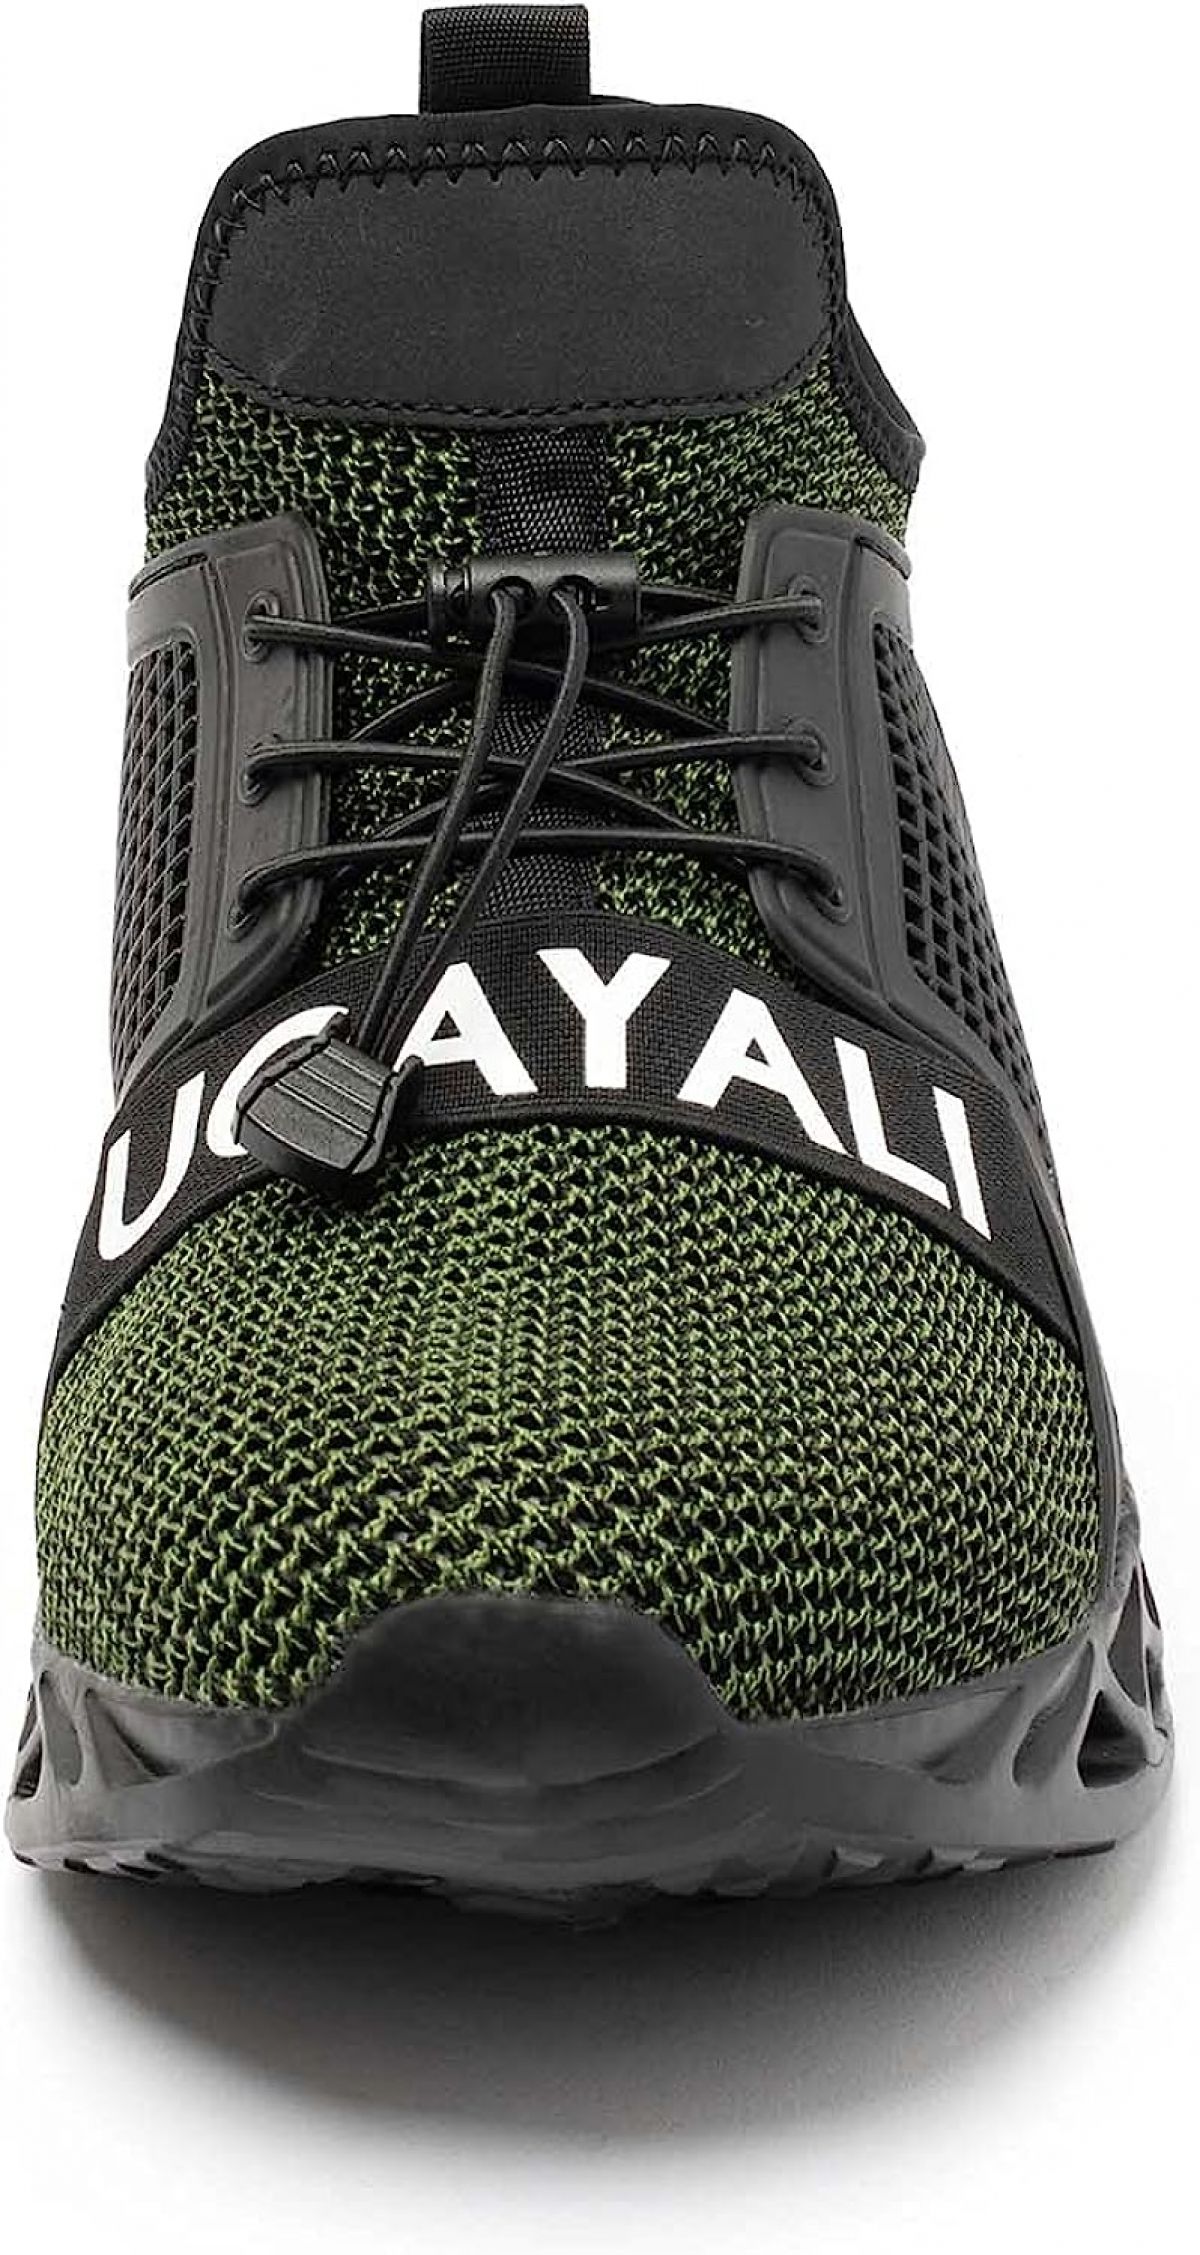 Safety shoes Ucayali, green, size 39